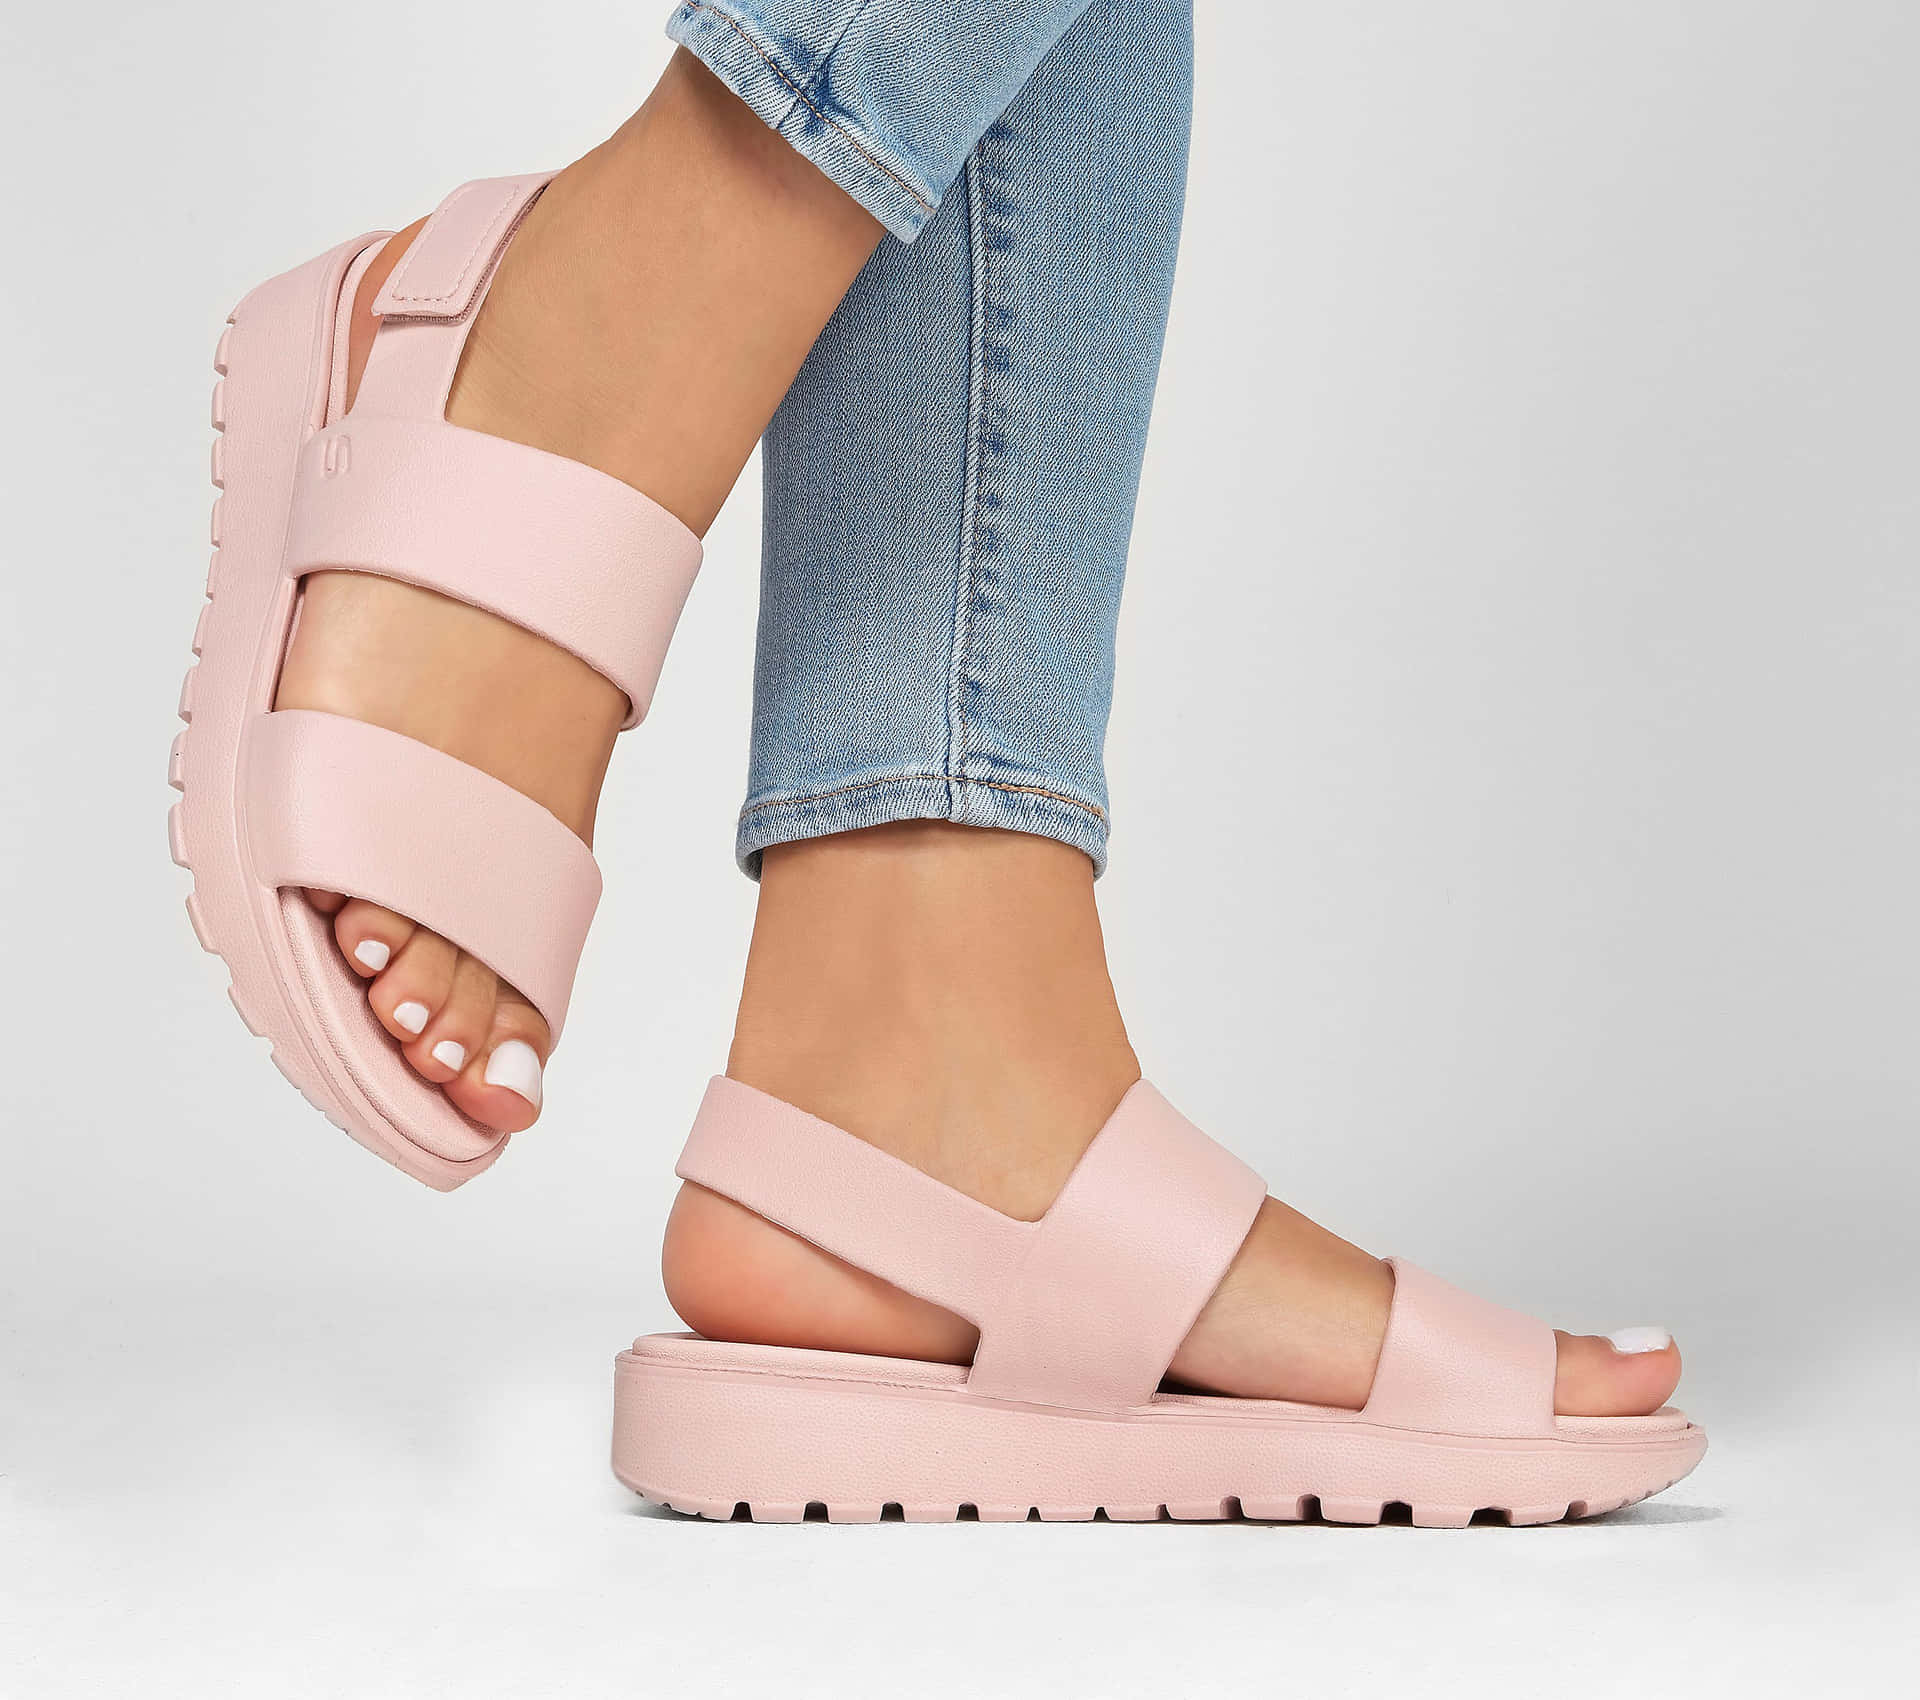 Beach-ready Stylish Sandals for a Relaxing Getaway Wallpaper